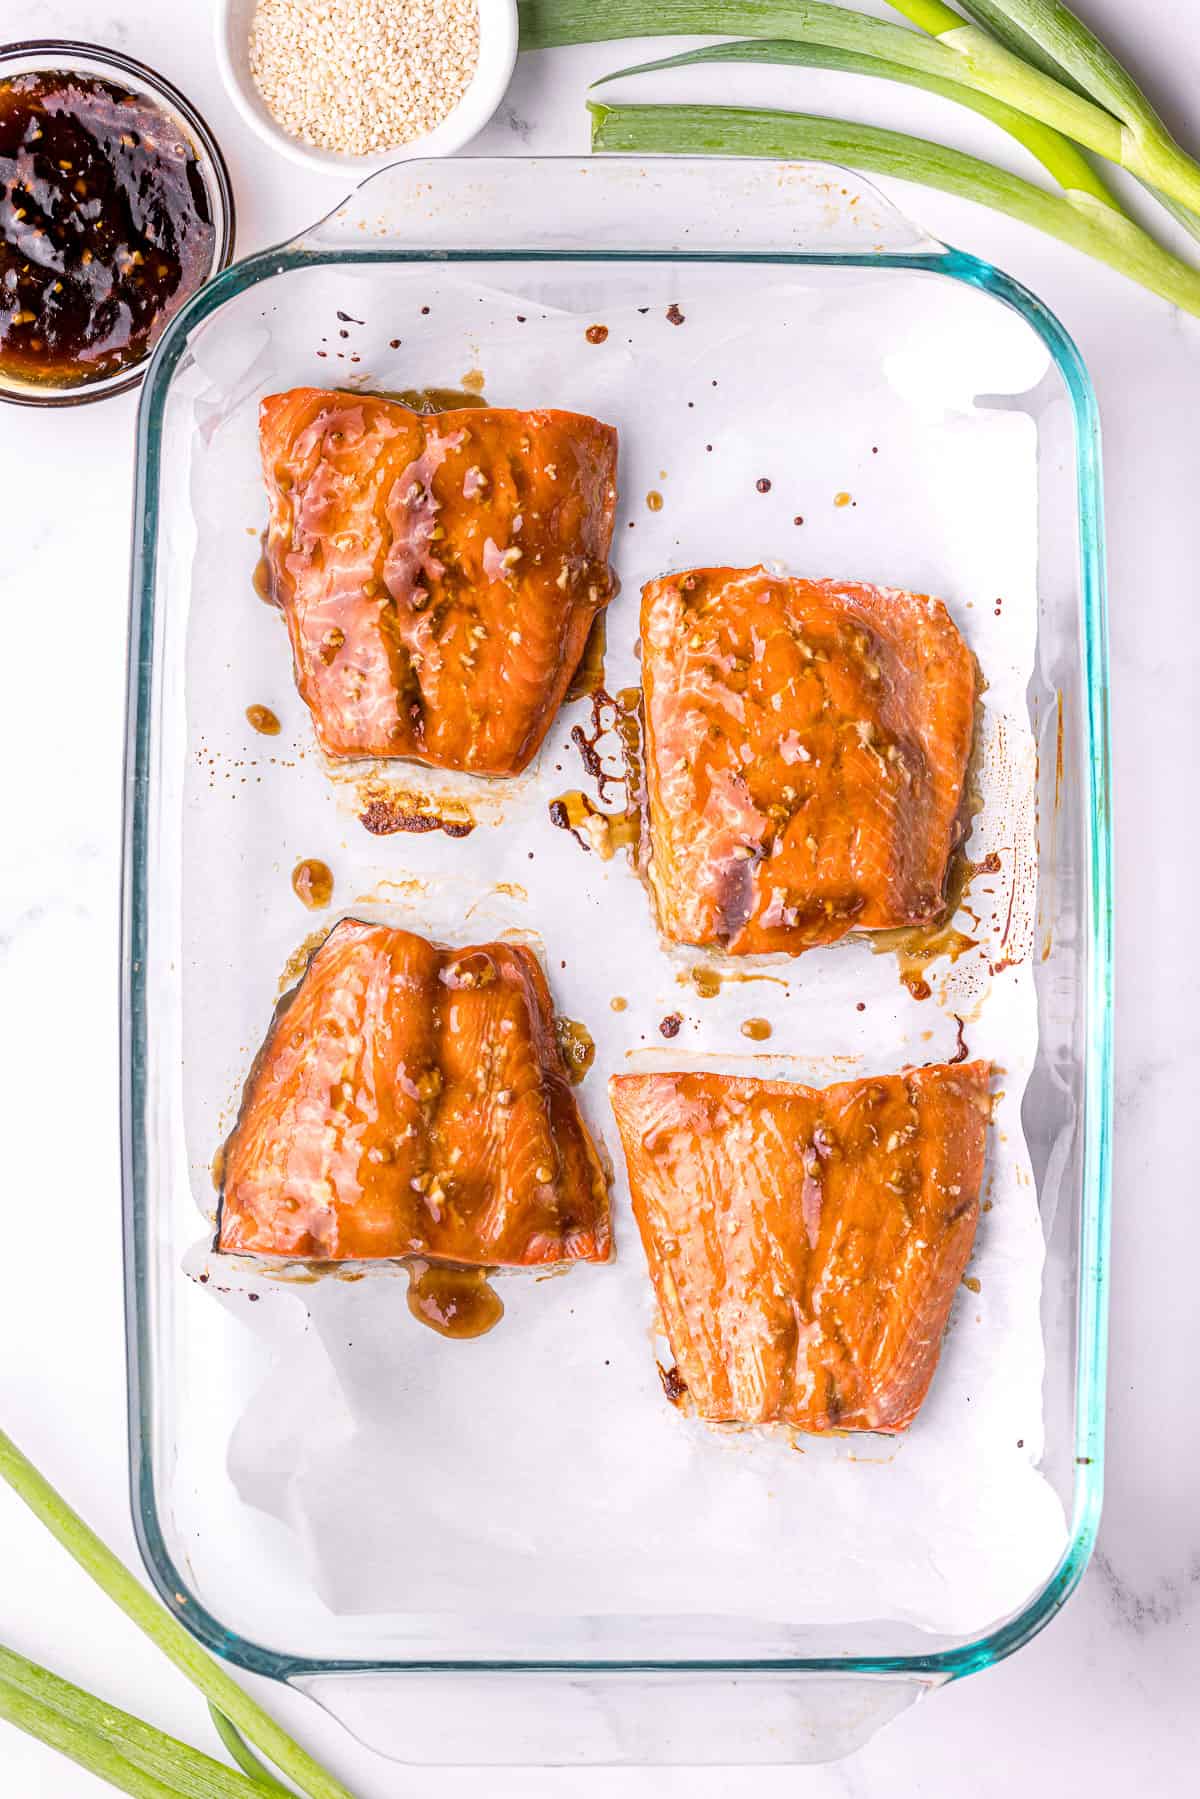 Baked salmon fresh from the oven, steaming and bubbling in the teriyaki glaze.